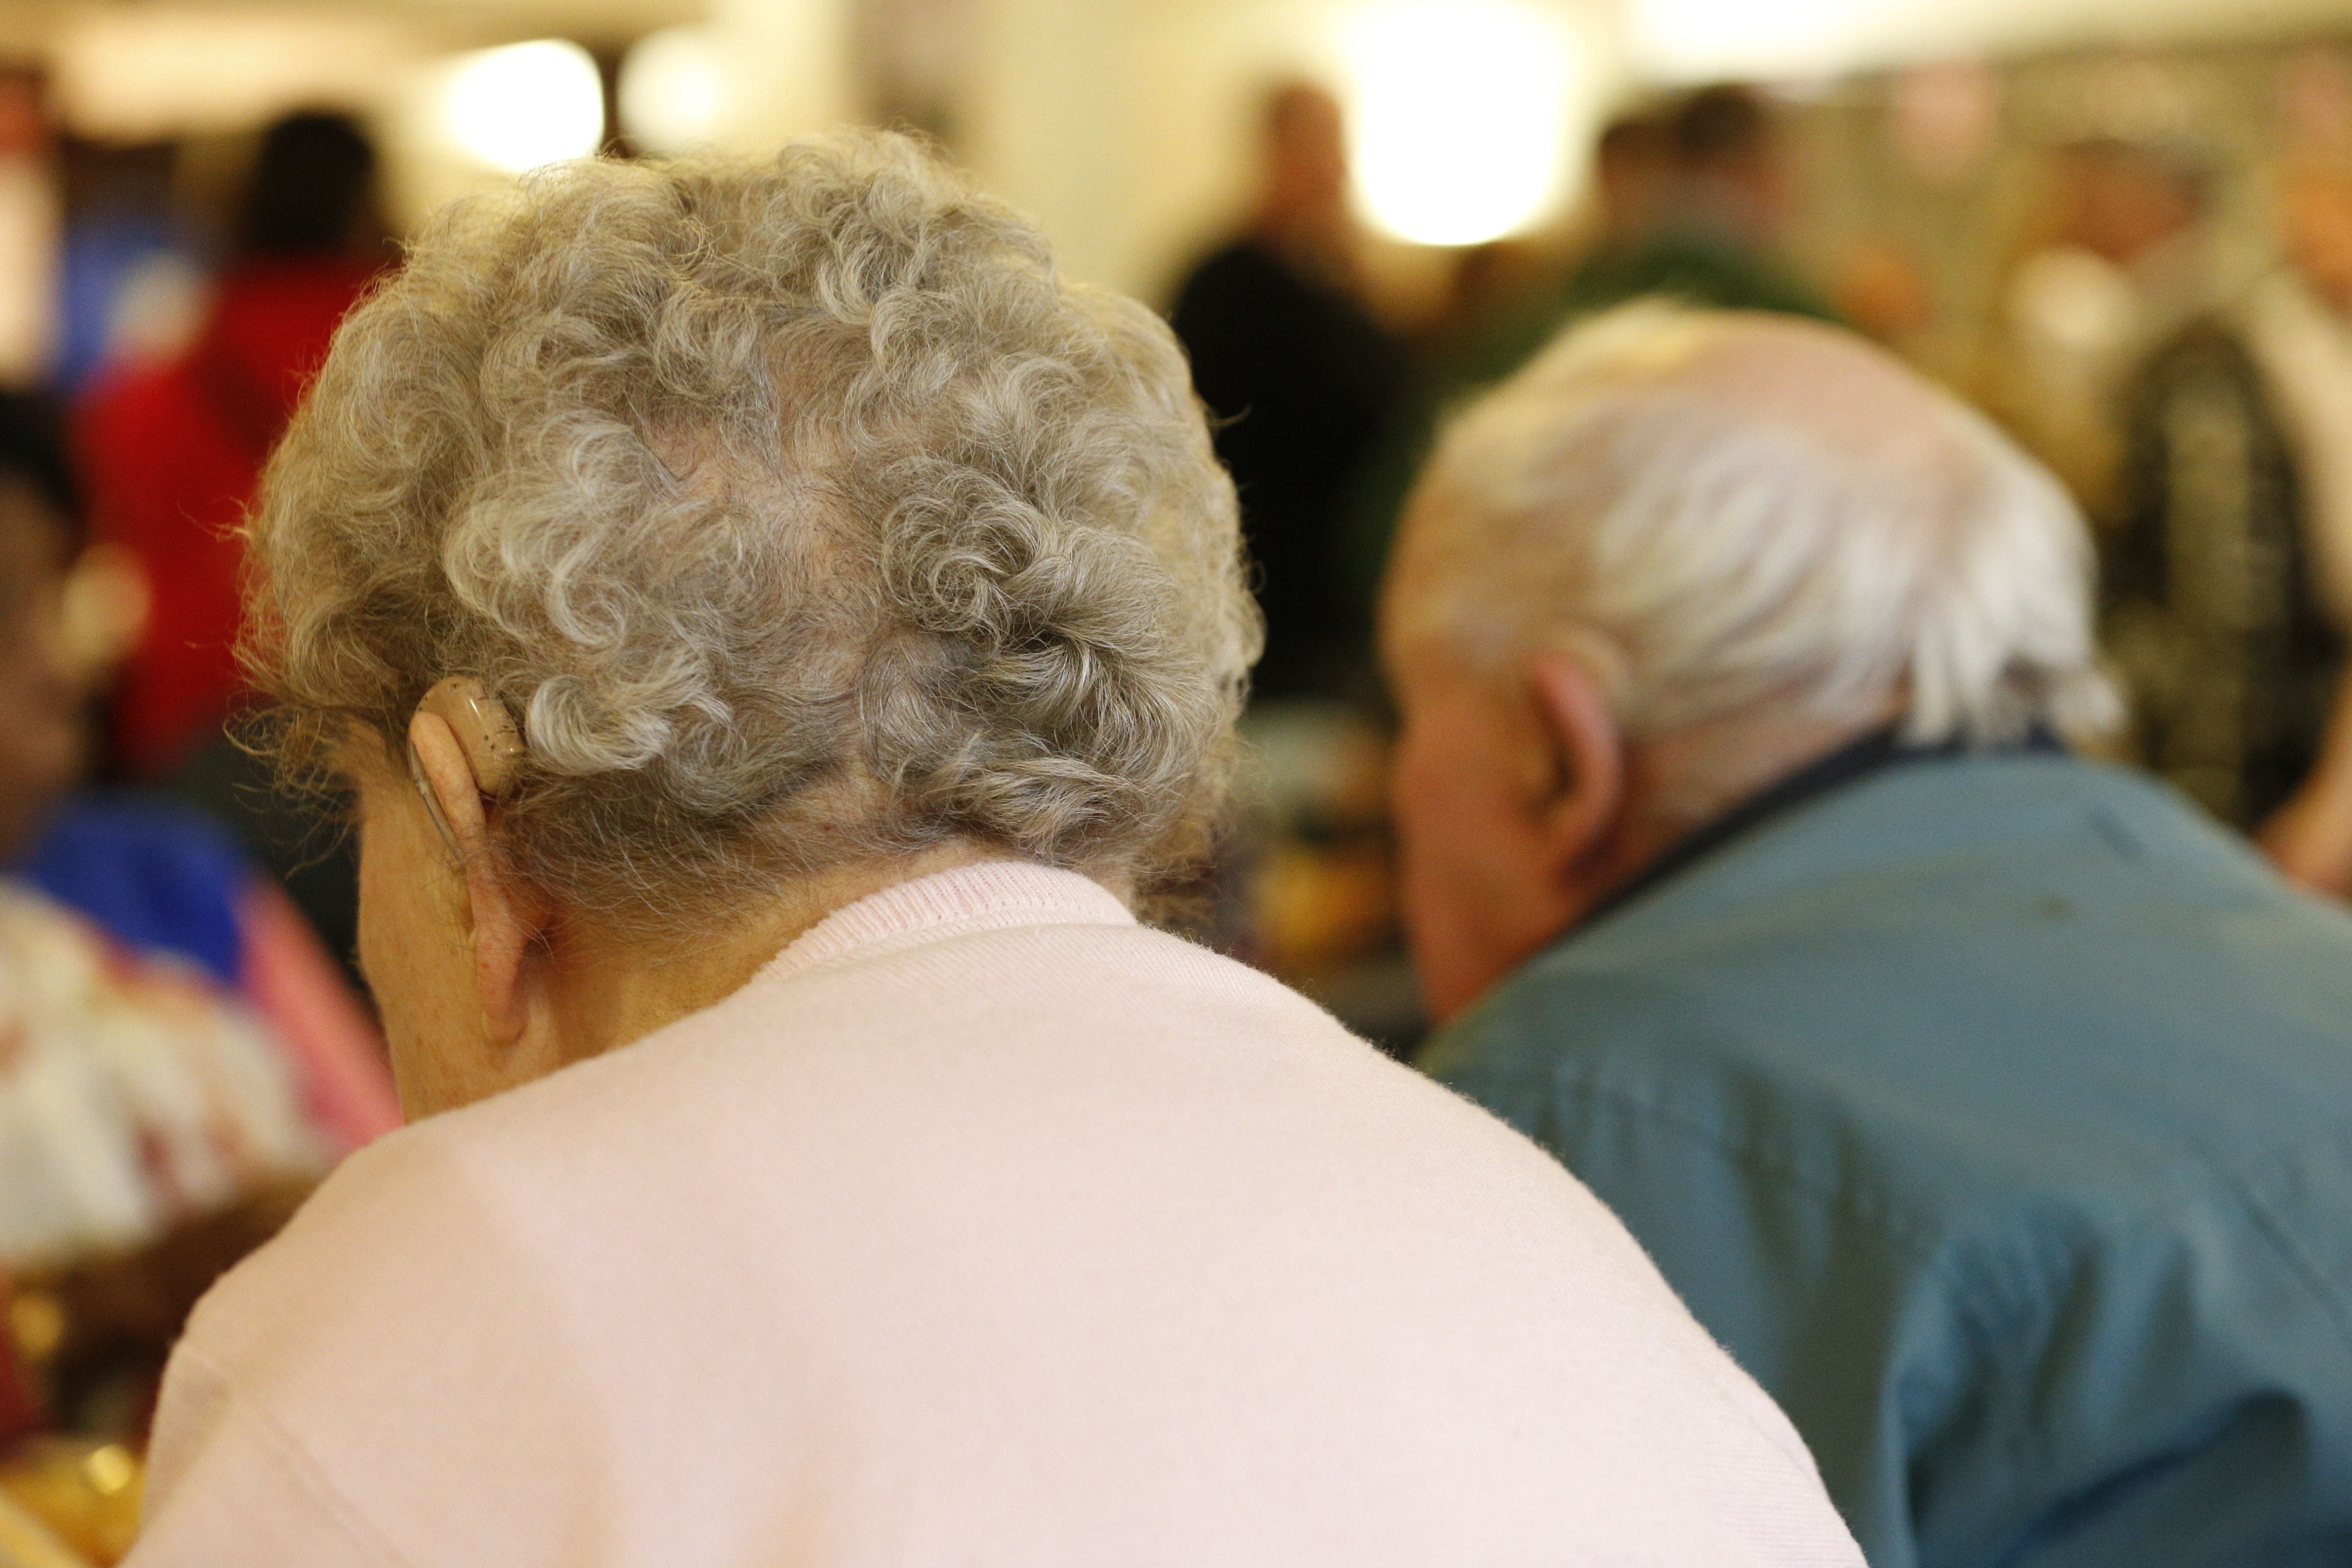 England’s social care system needs a radical redesign, the Archbishops’ Commission said (Jonathan Brady/PA)